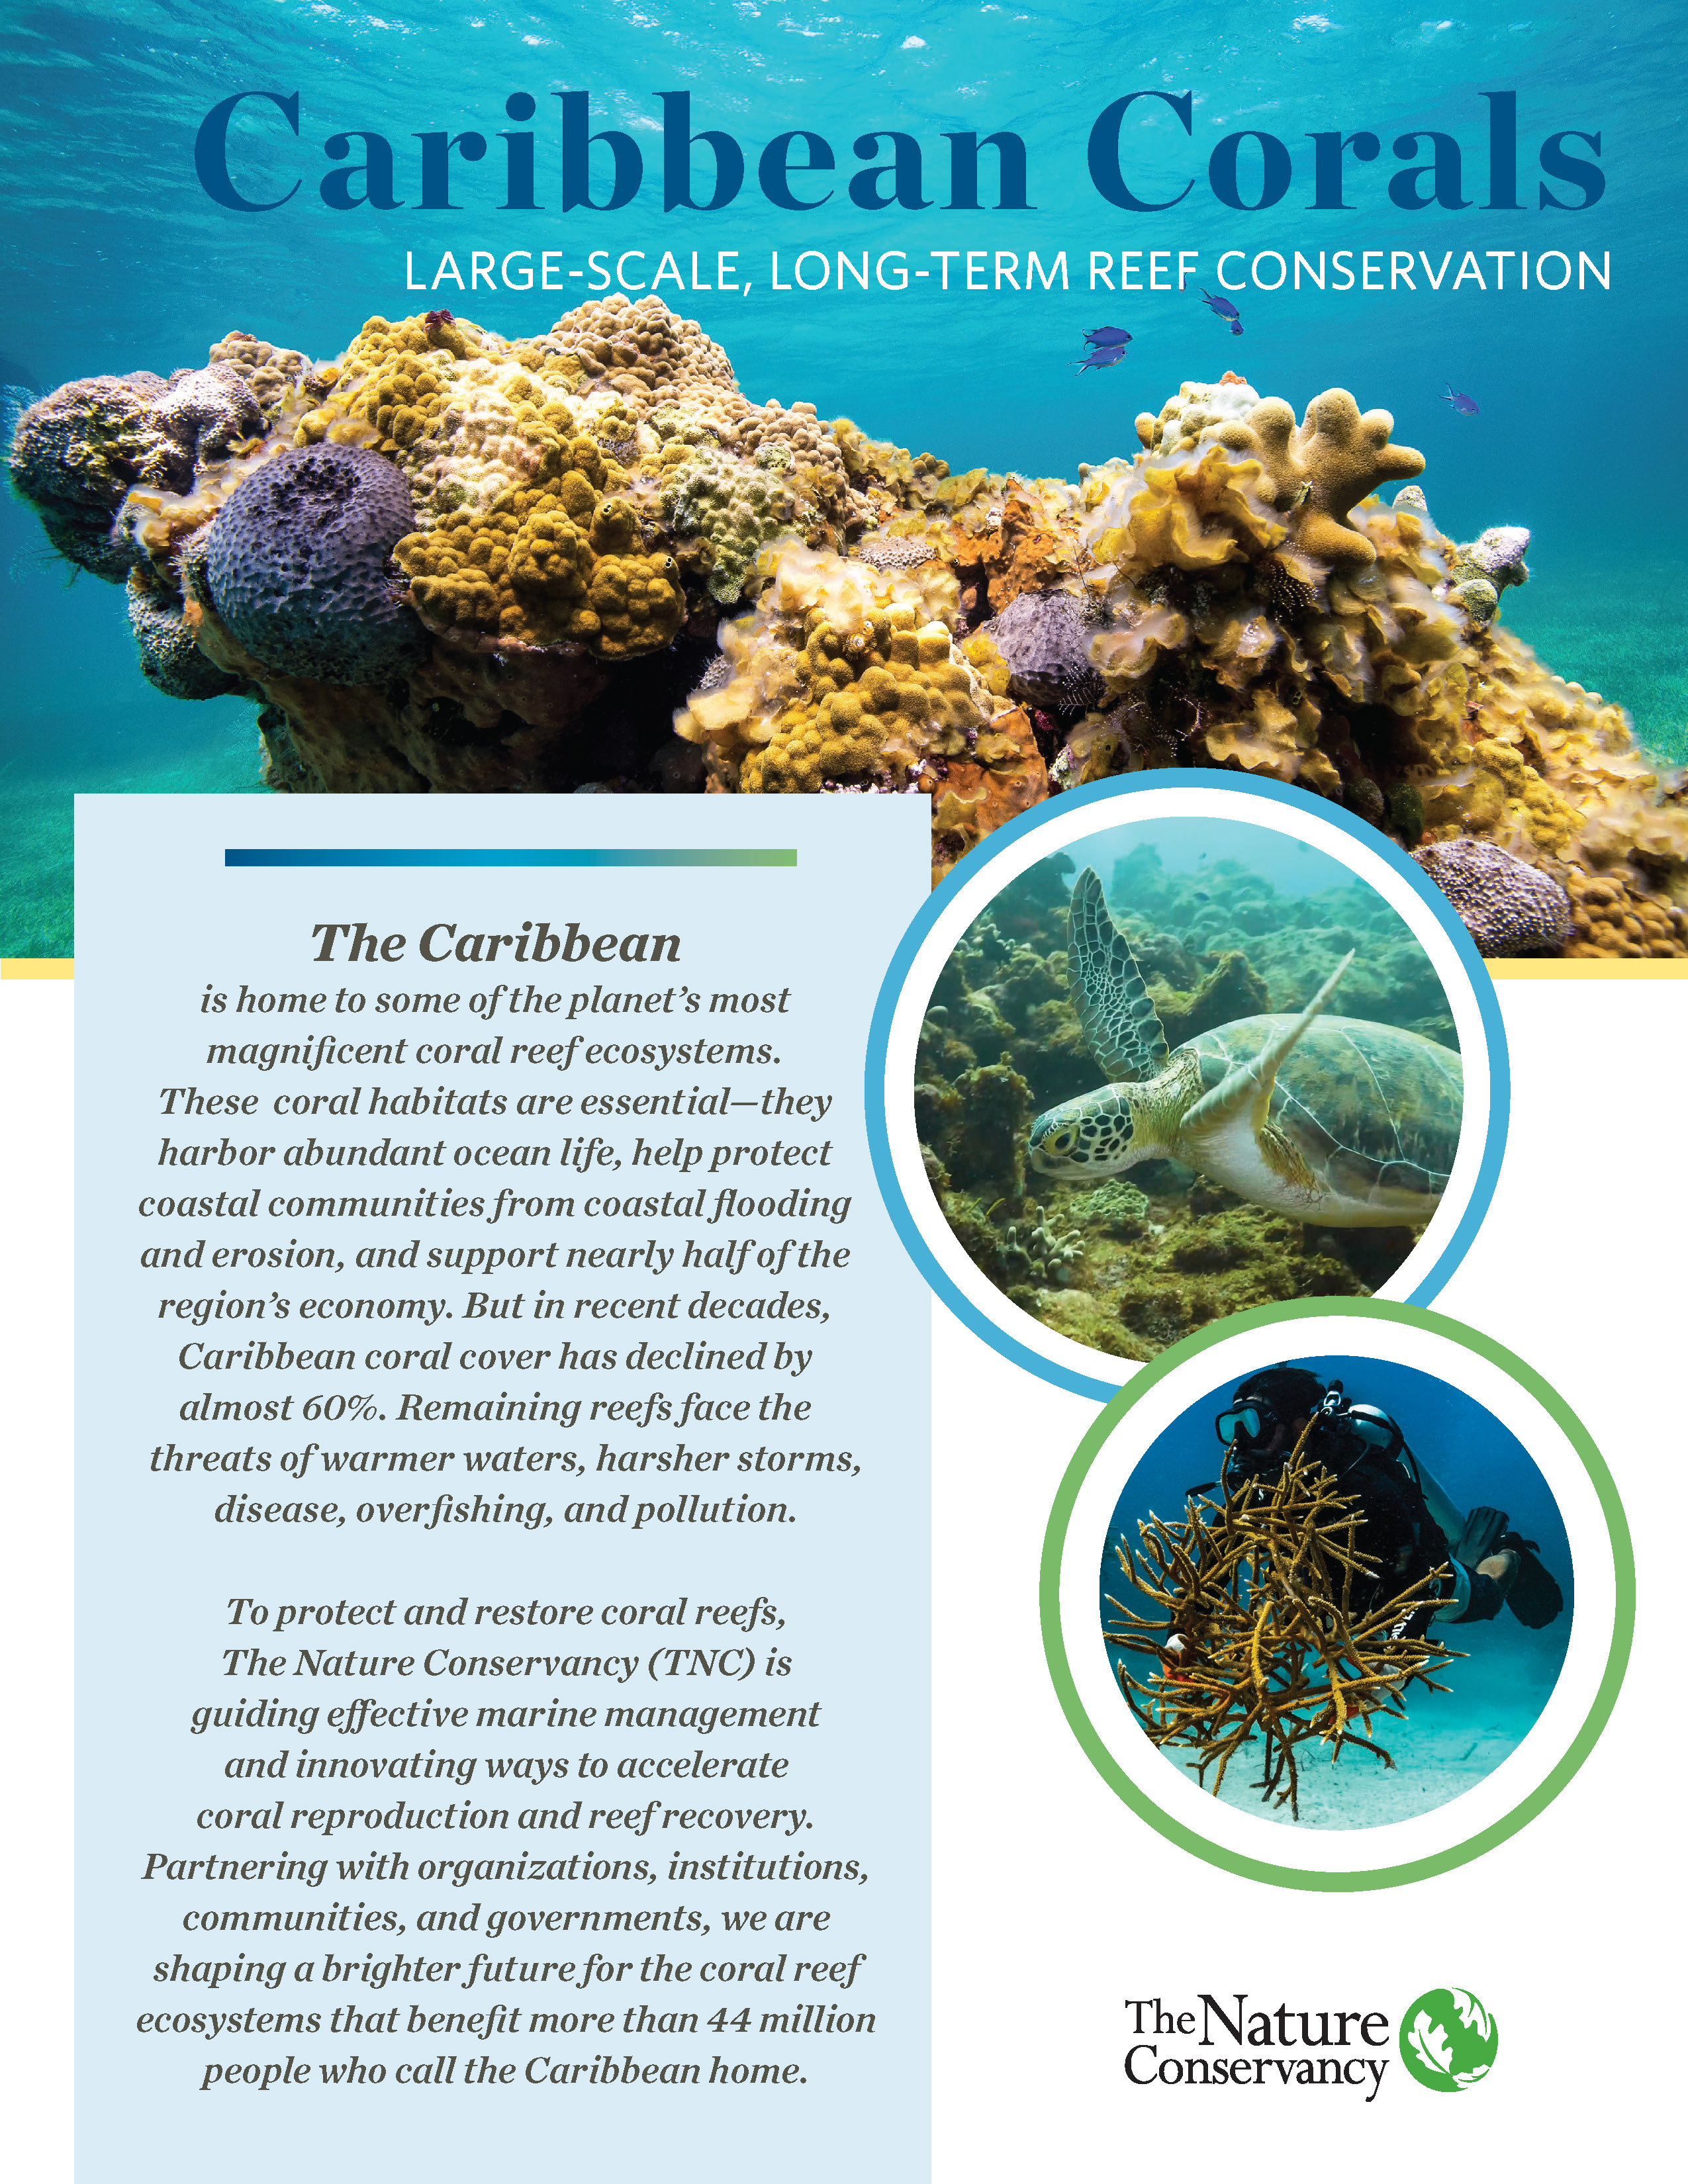 Restoring coral reefs benefits entire ecosystems and economies